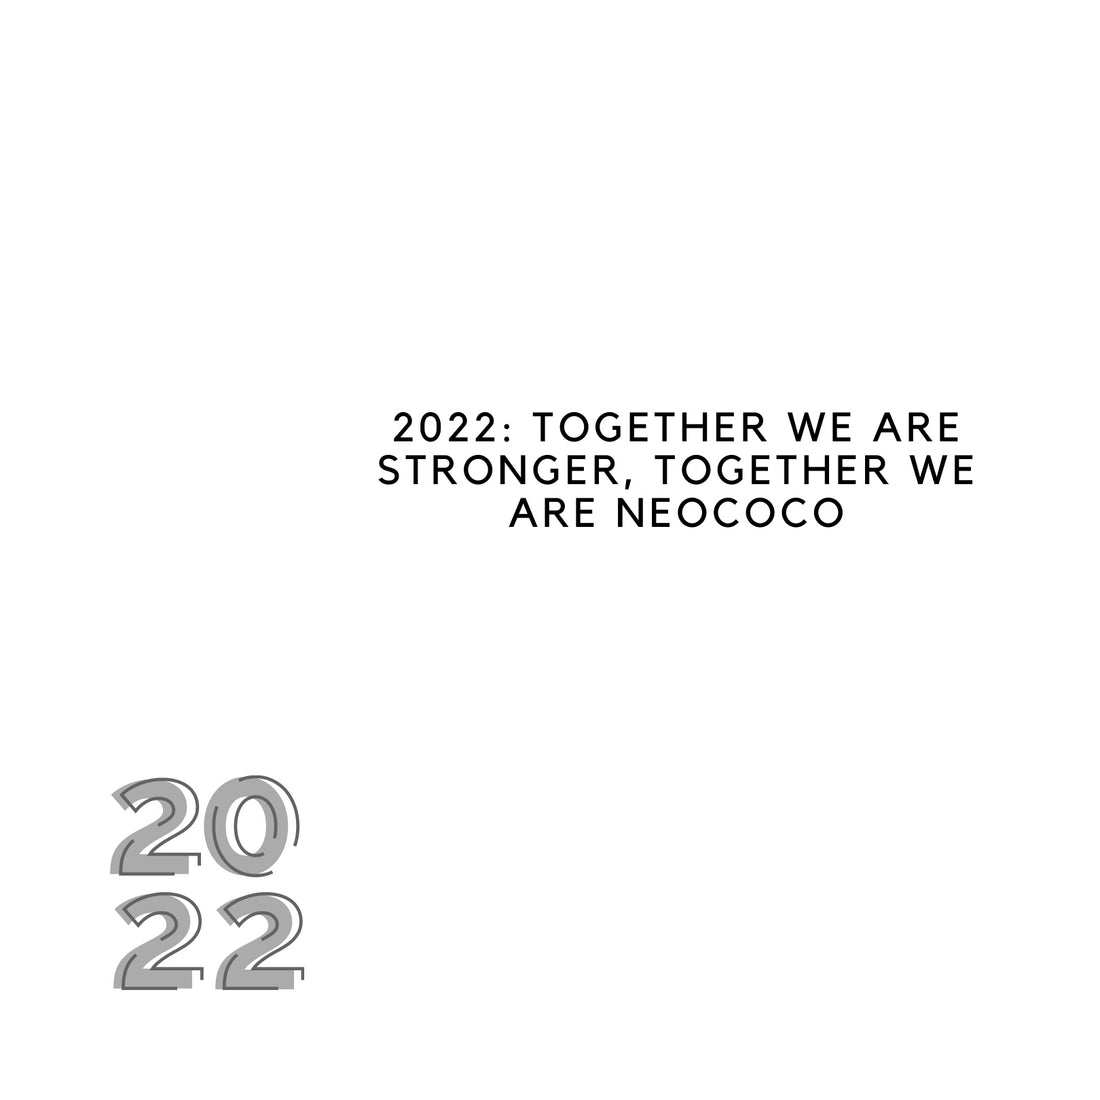 2022: Together We Are Stronger, Together We Are NEOCOCO